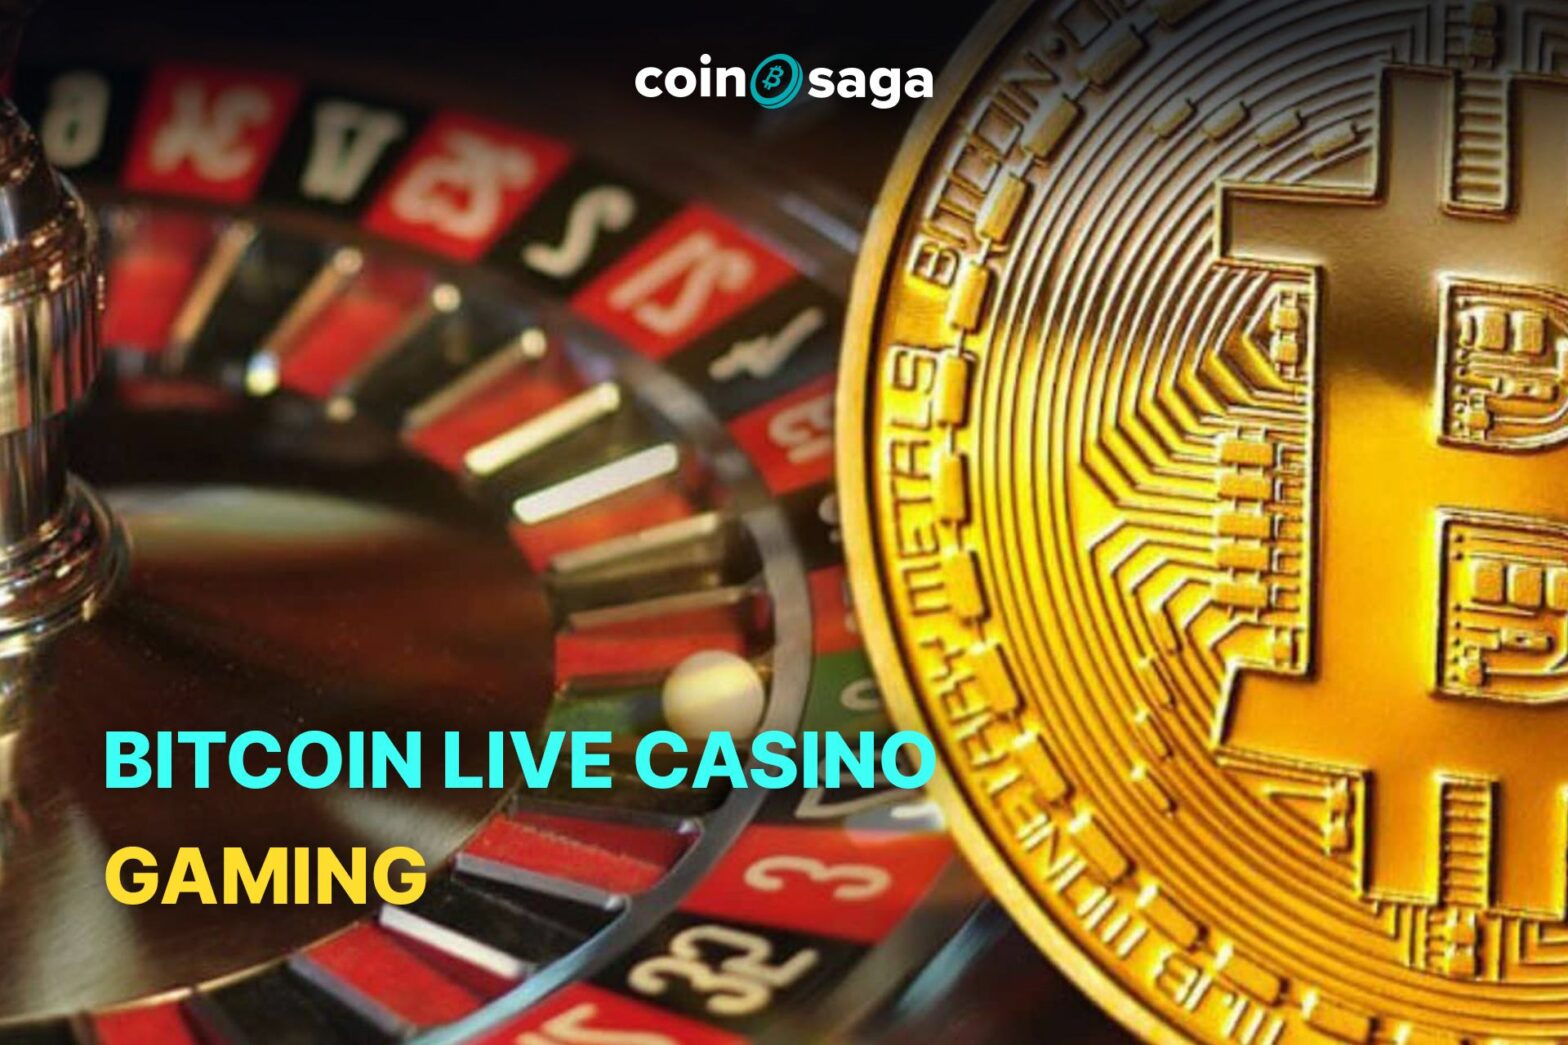 cryptocurrency casino And Love Have 4 Things In Common